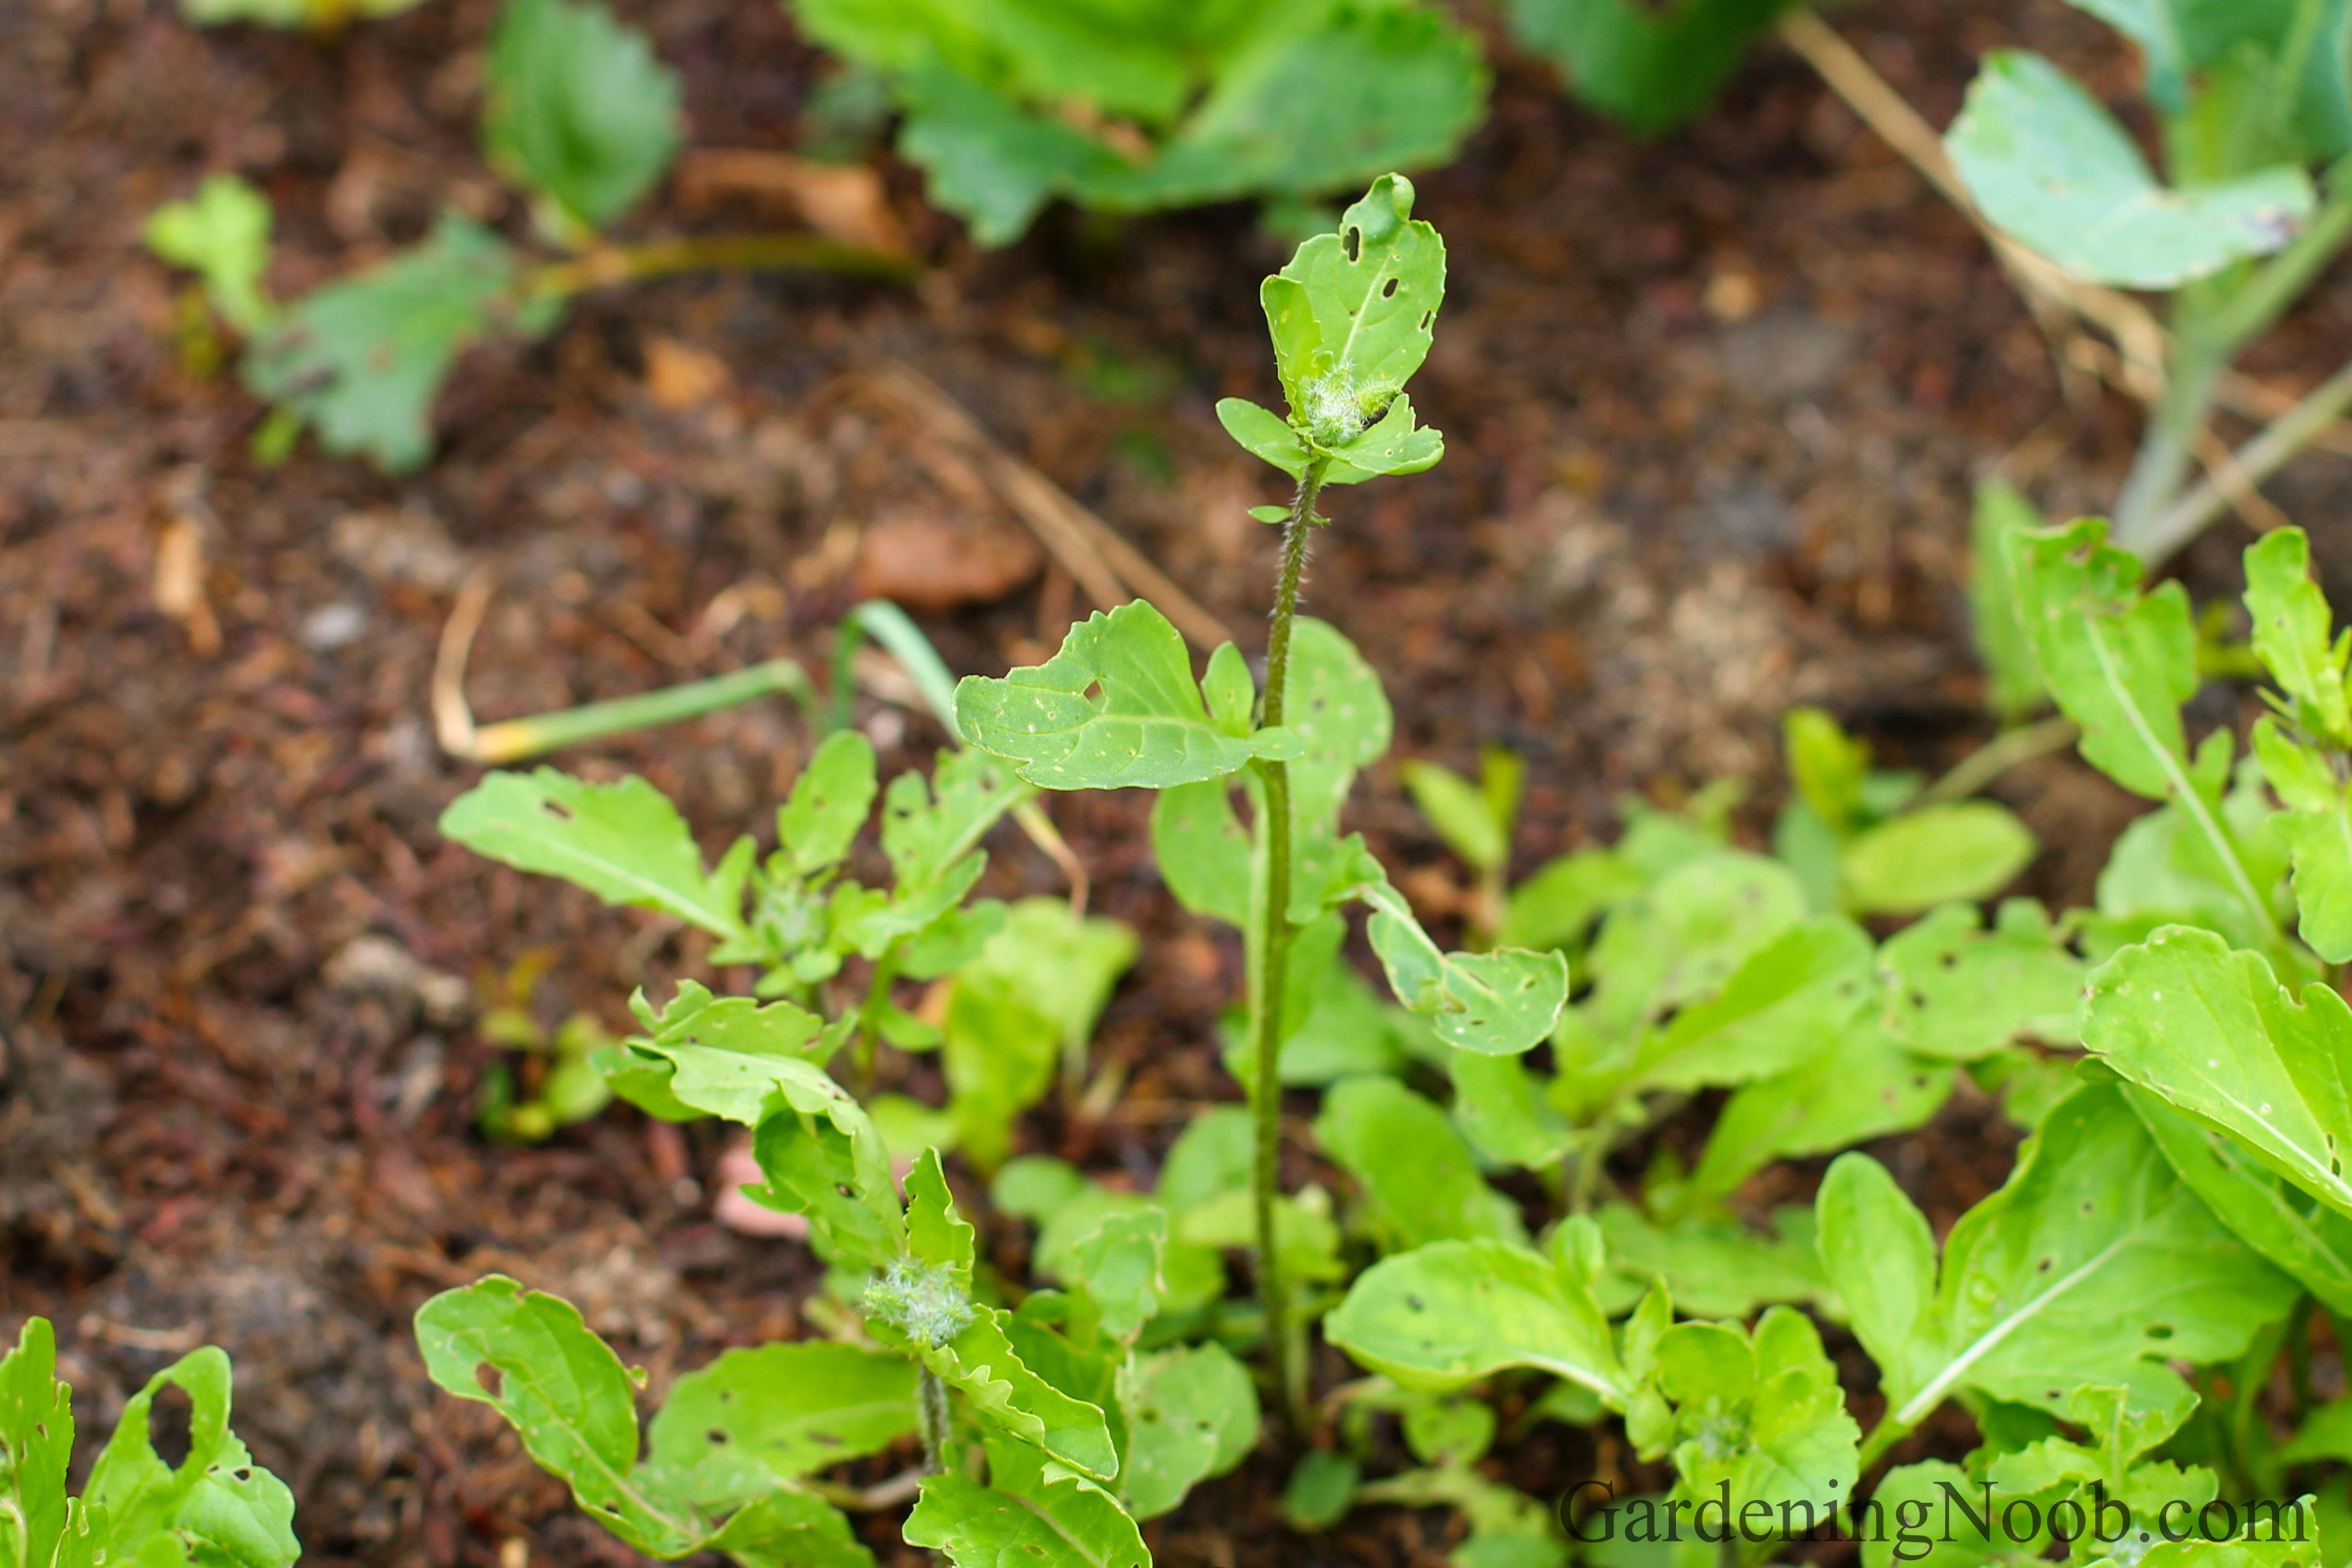 Arugula starts growing flowering stems when the weather gets warmer towards the end of spring...